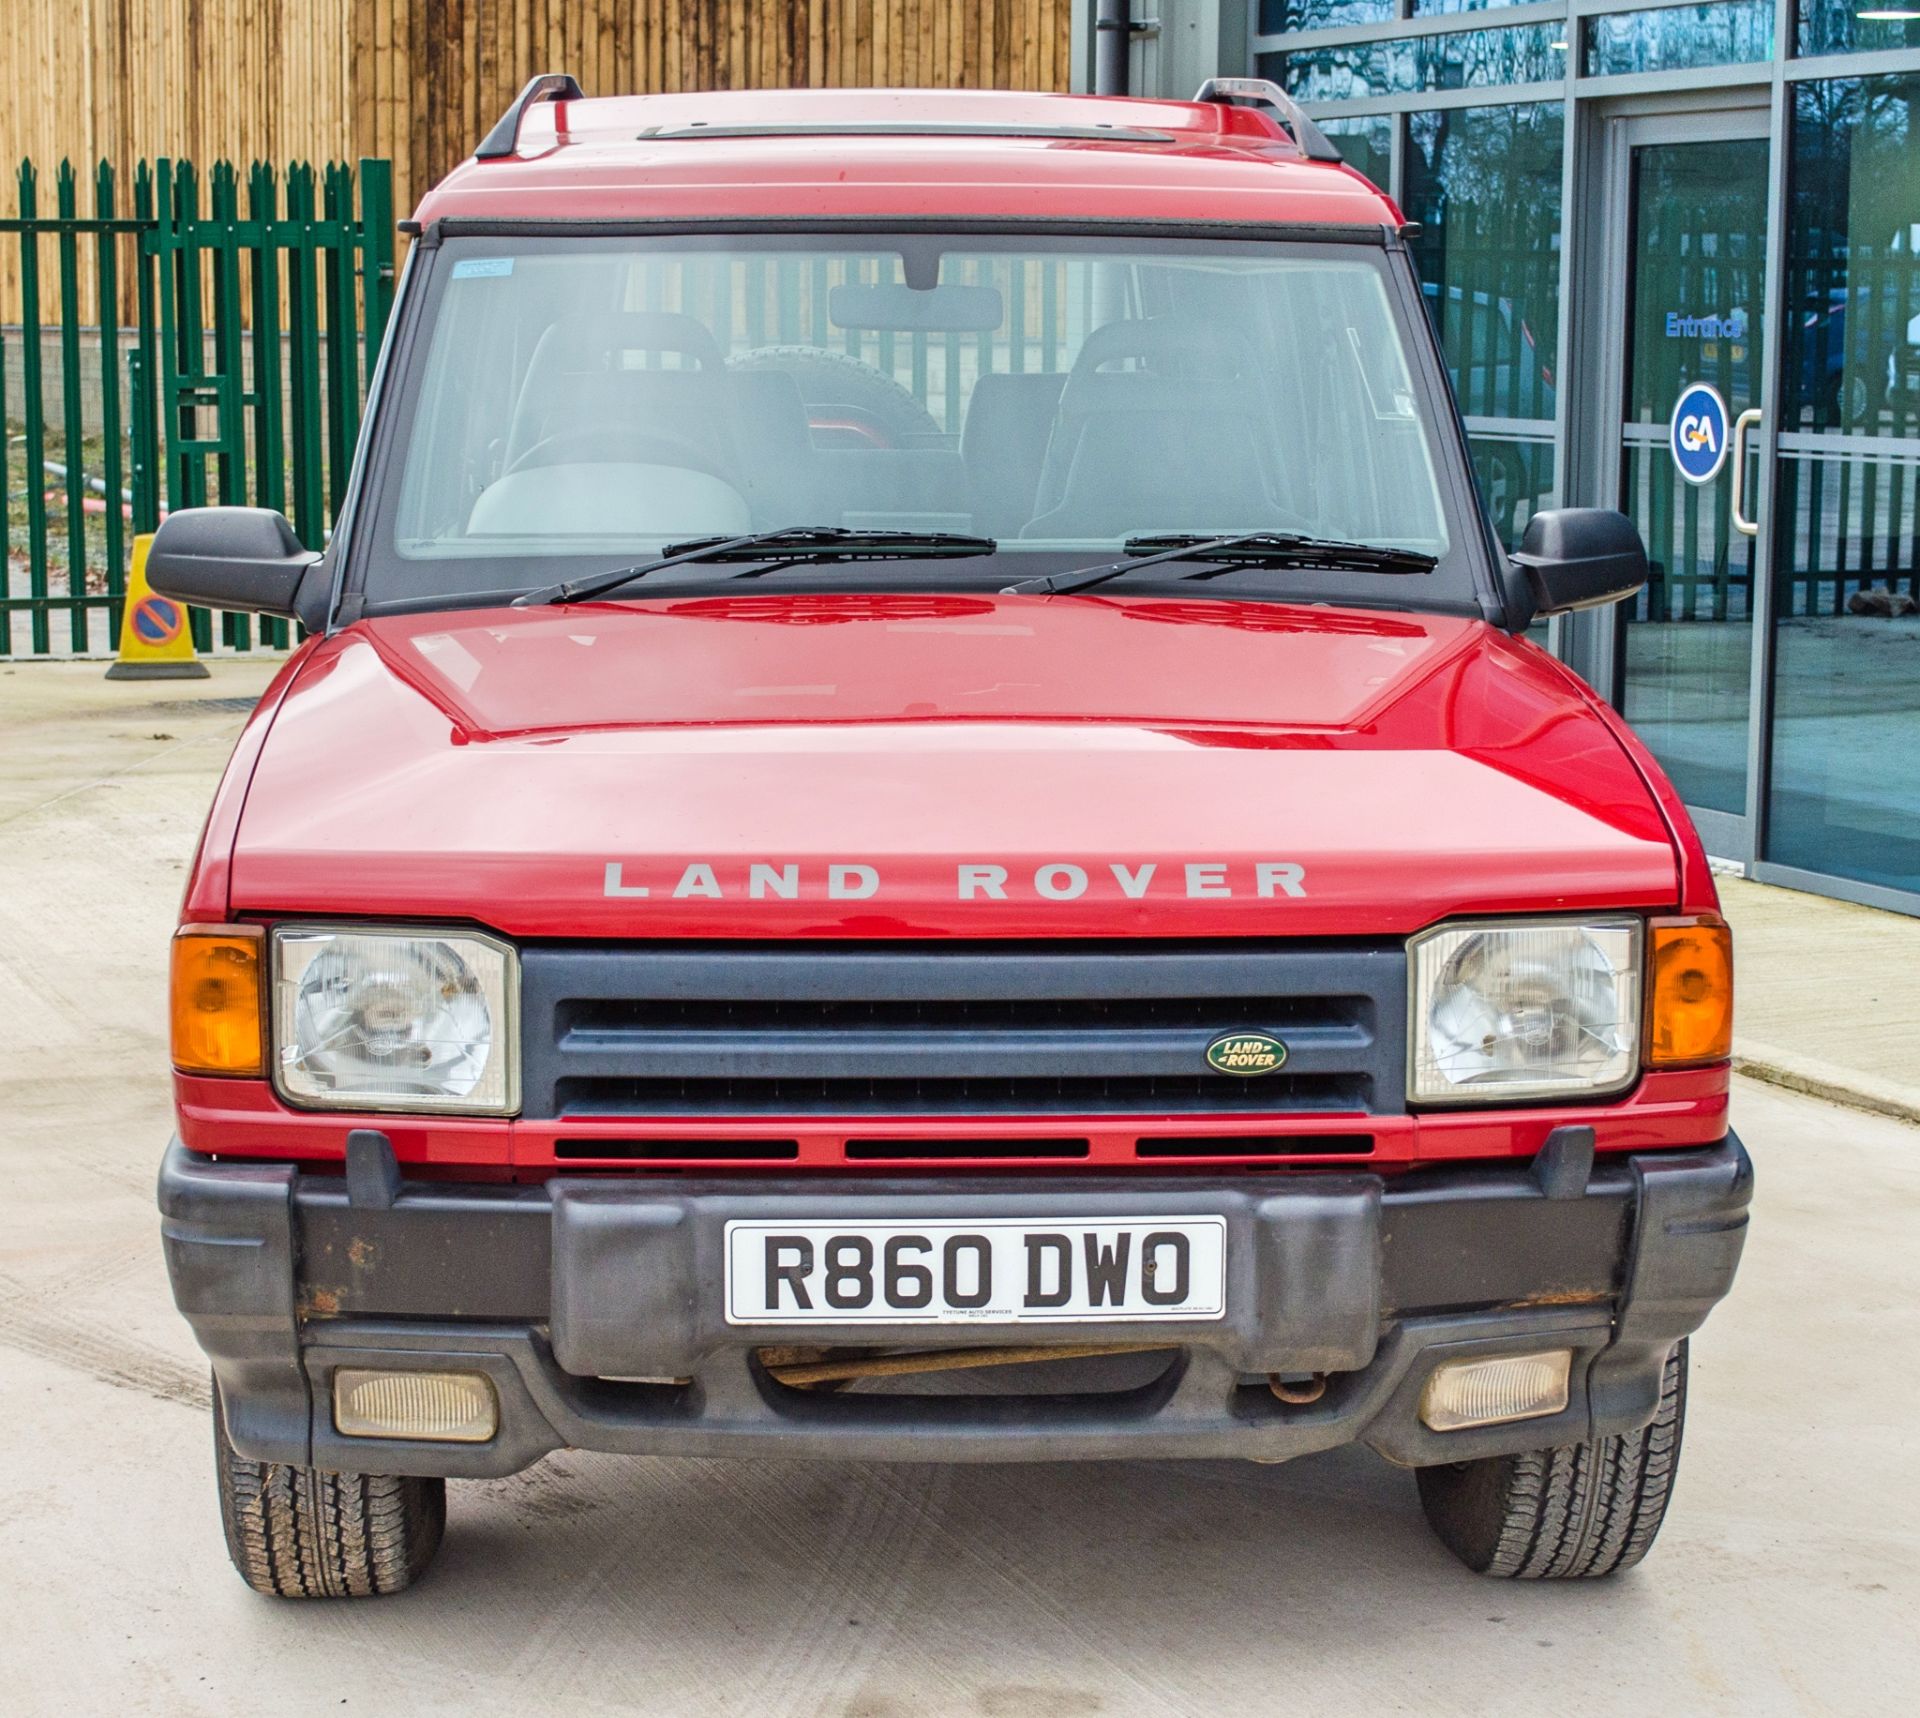 1998 Landrover Discovery 3.9 litre V8 manual 5 door 4wd - Image 10 of 46